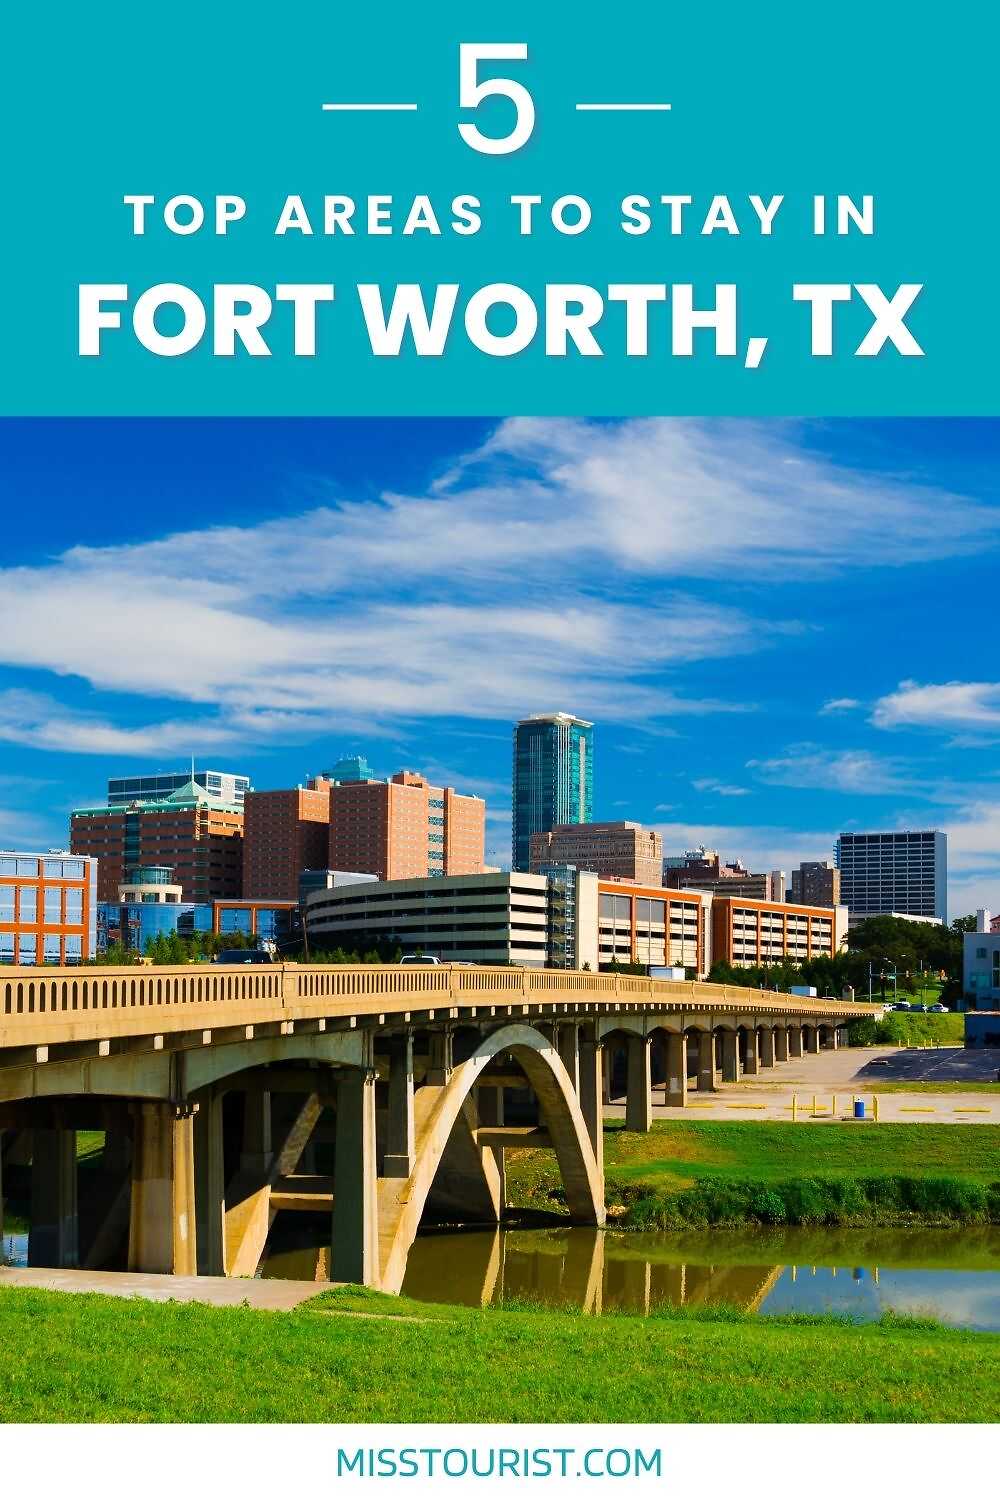 Advertisement featuring '5 TOP AREAS TO STAY IN FORT WORTH, TX' with a picturesque view of the city skyline and a bridge over a calm river, promoting travel content at MissTourist.com